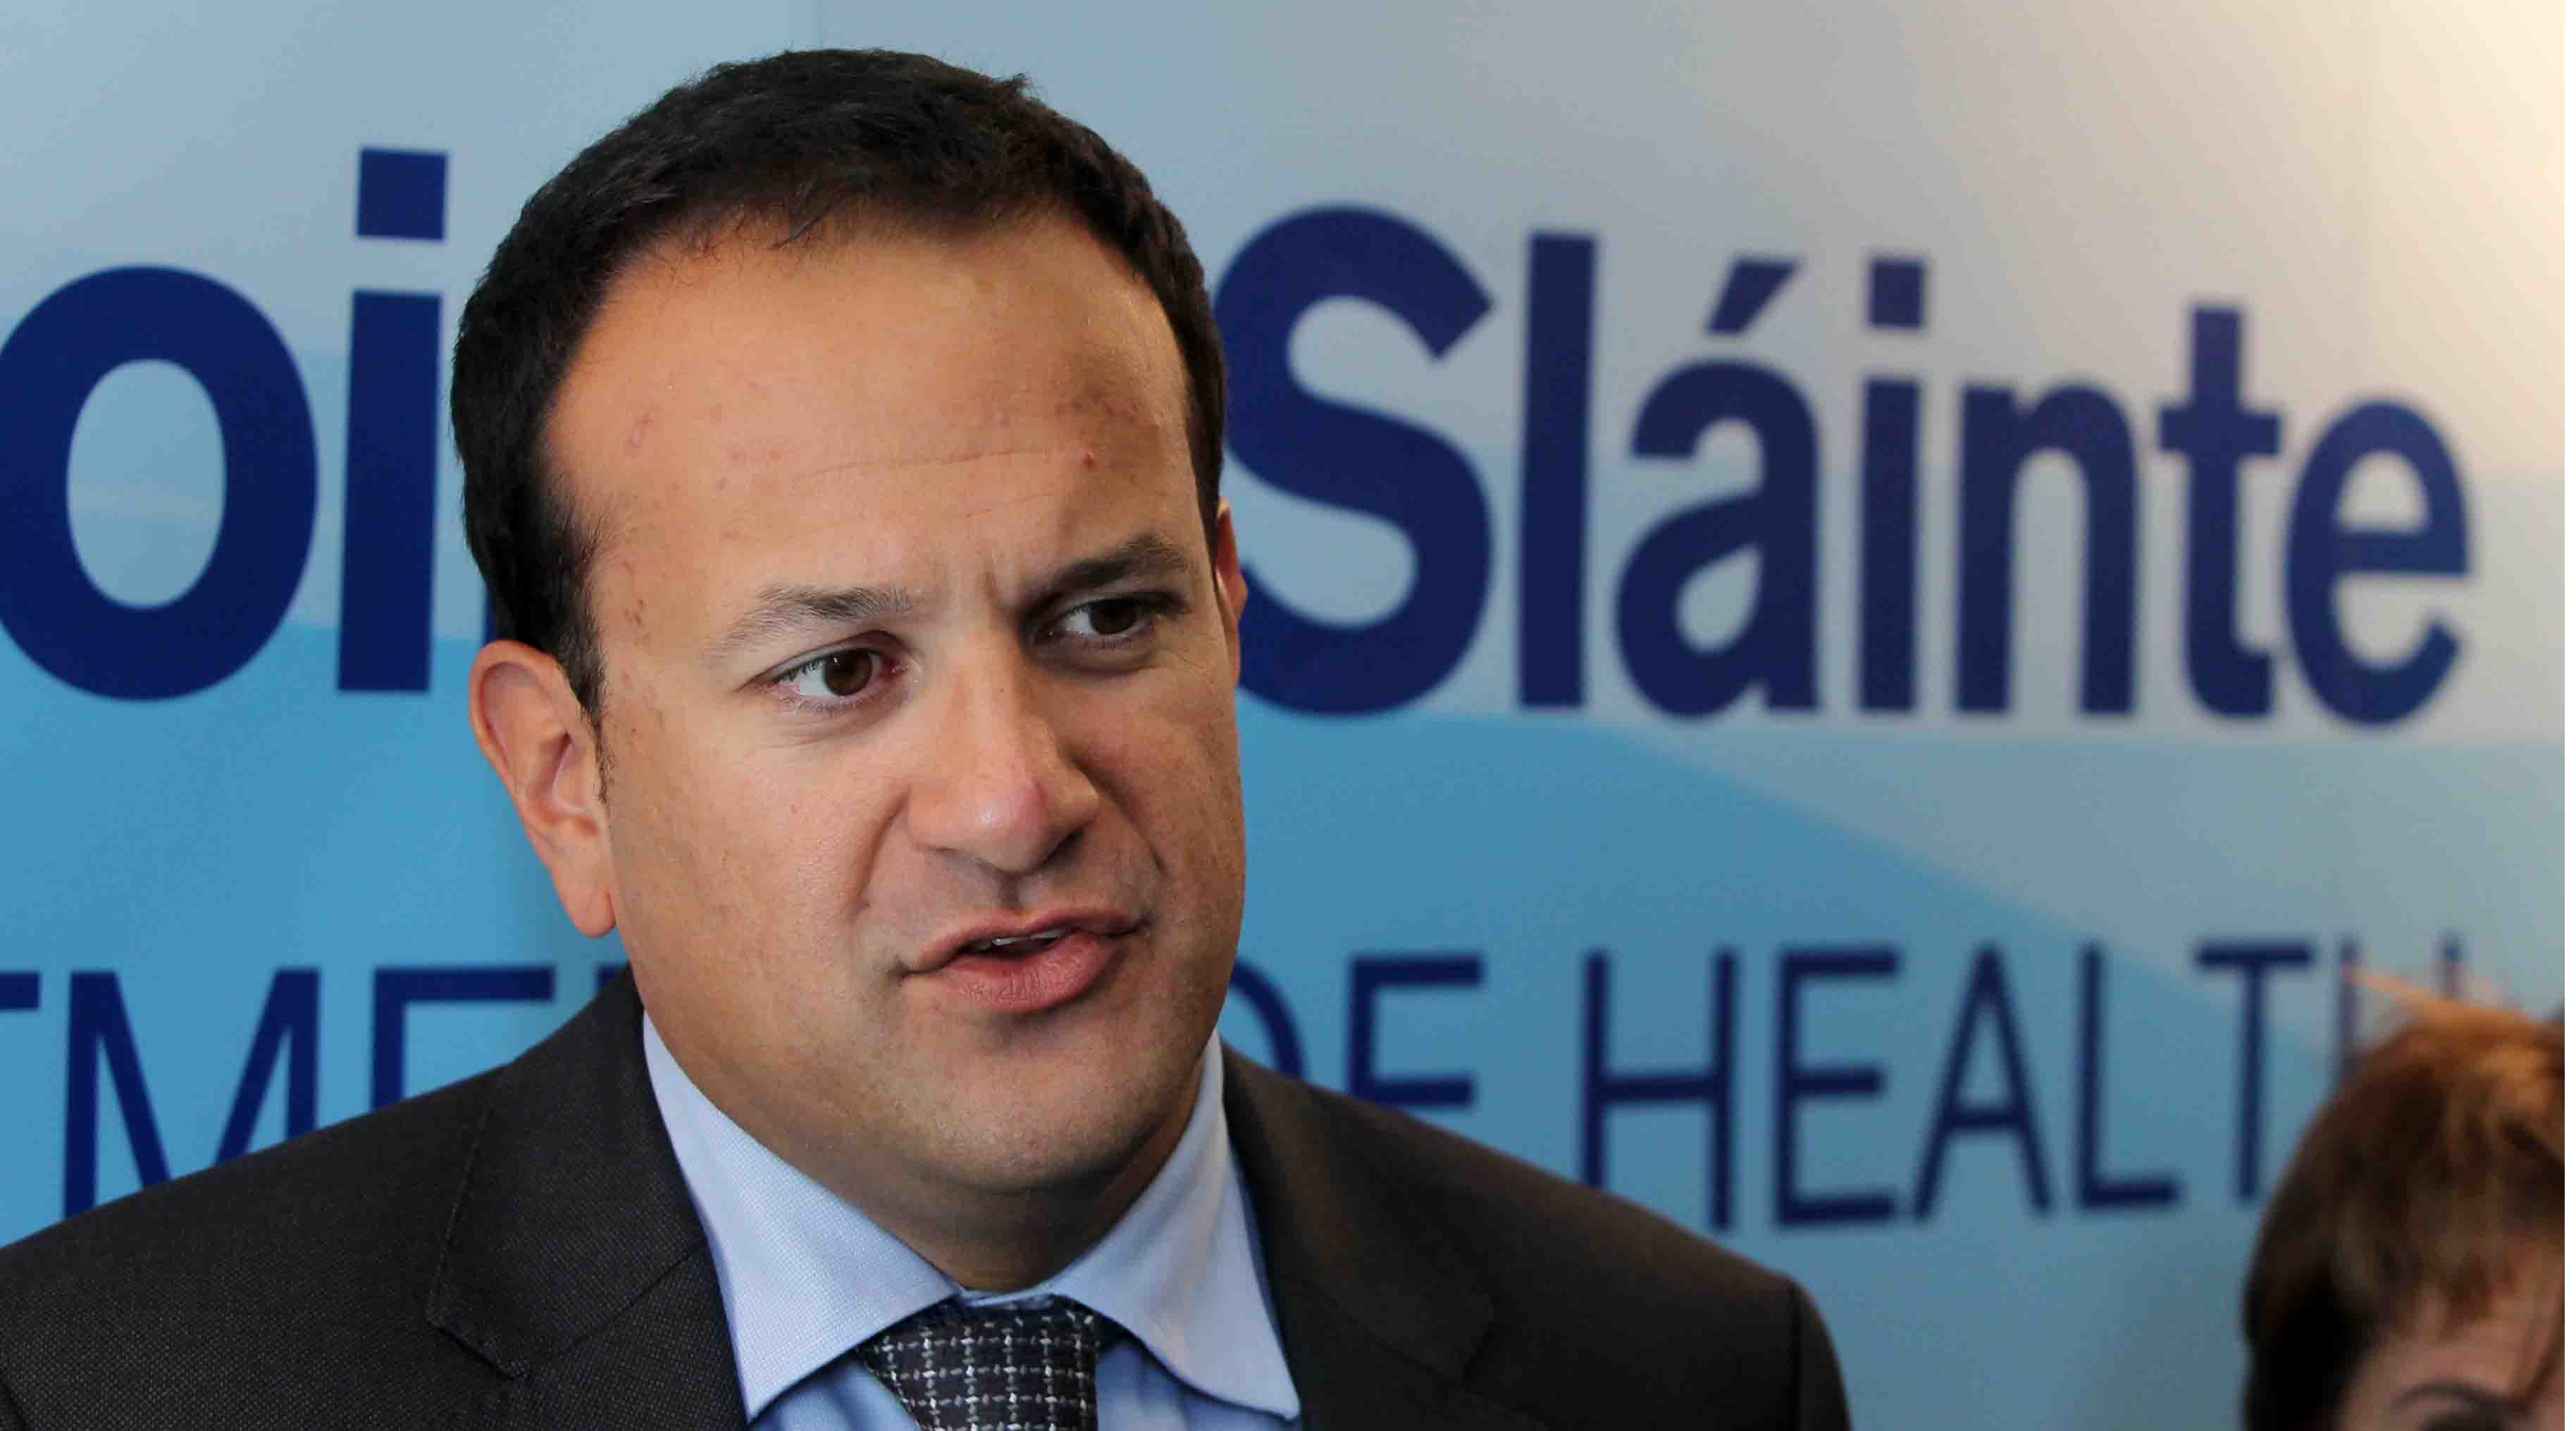 Minister for Health Leo Varadkar will publish the Alcohol Bill this afternoon.